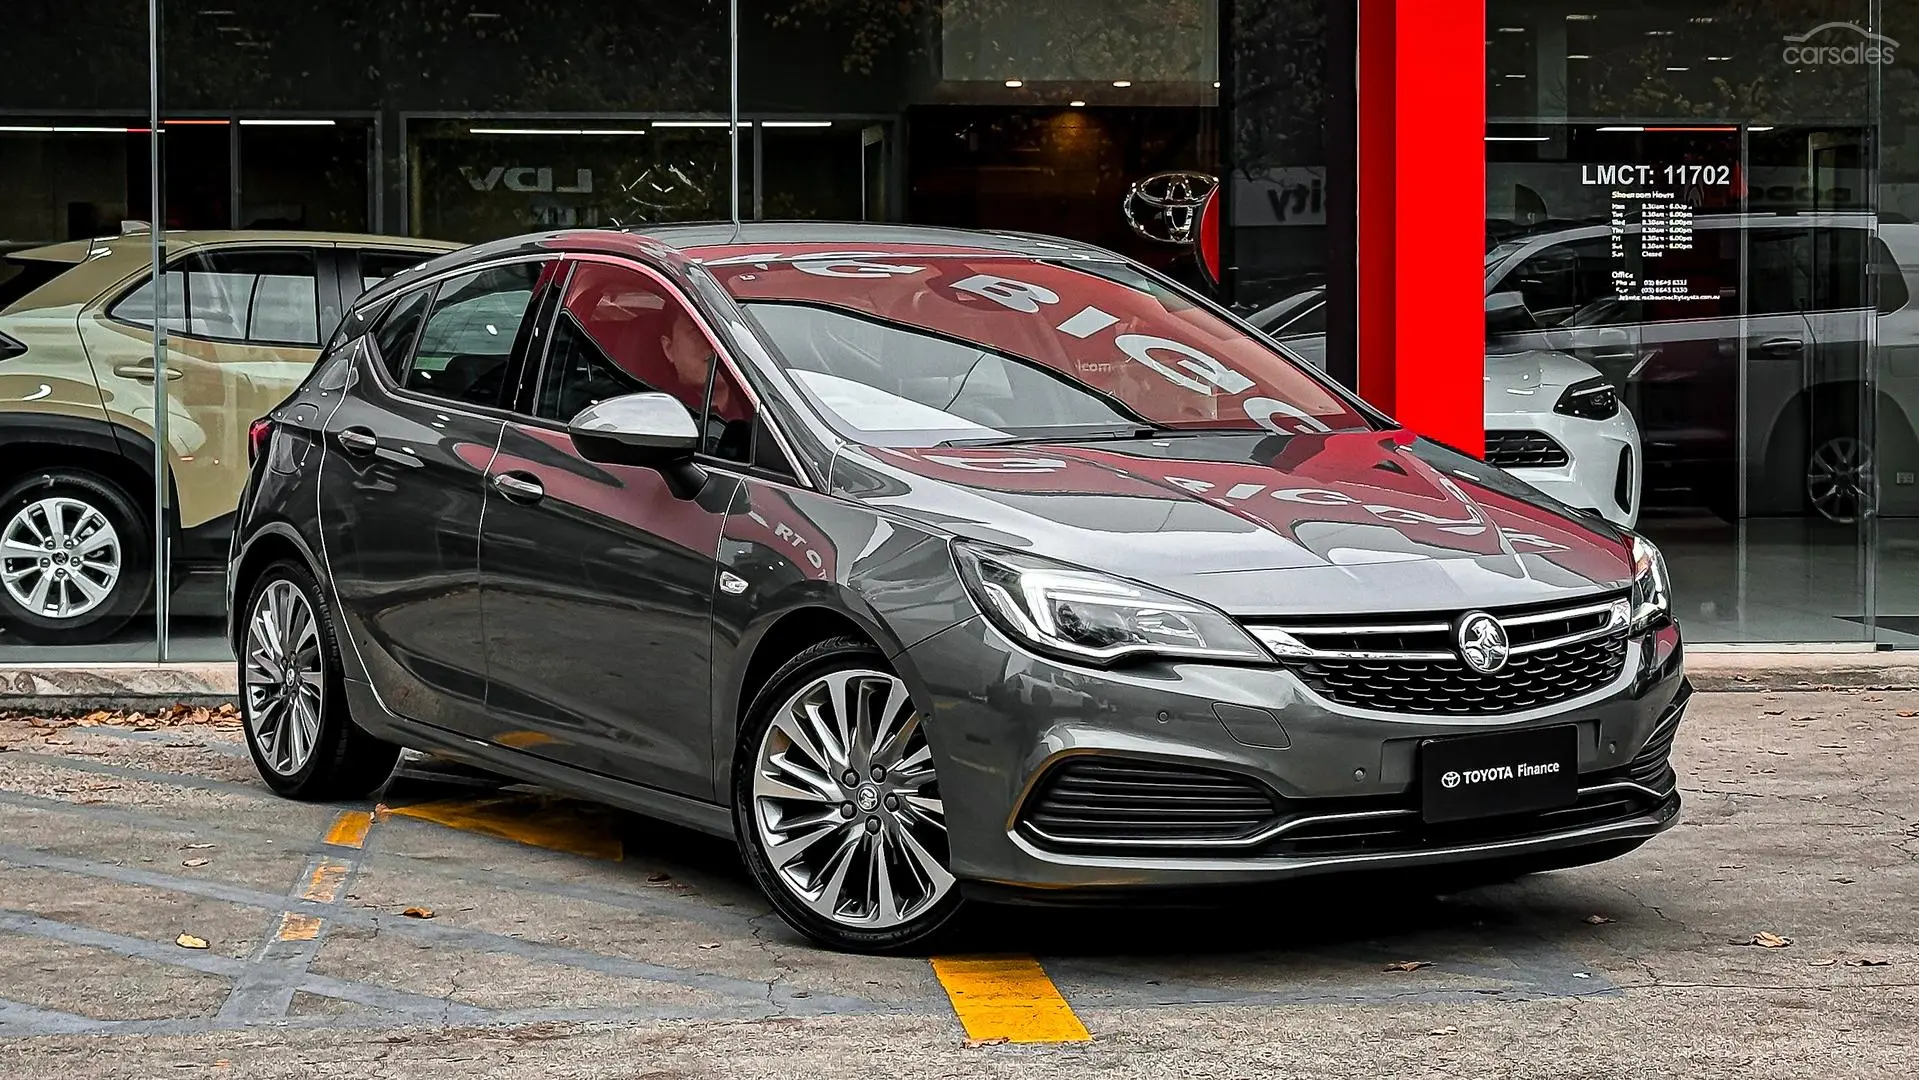 2017 Holden Astra Image 1